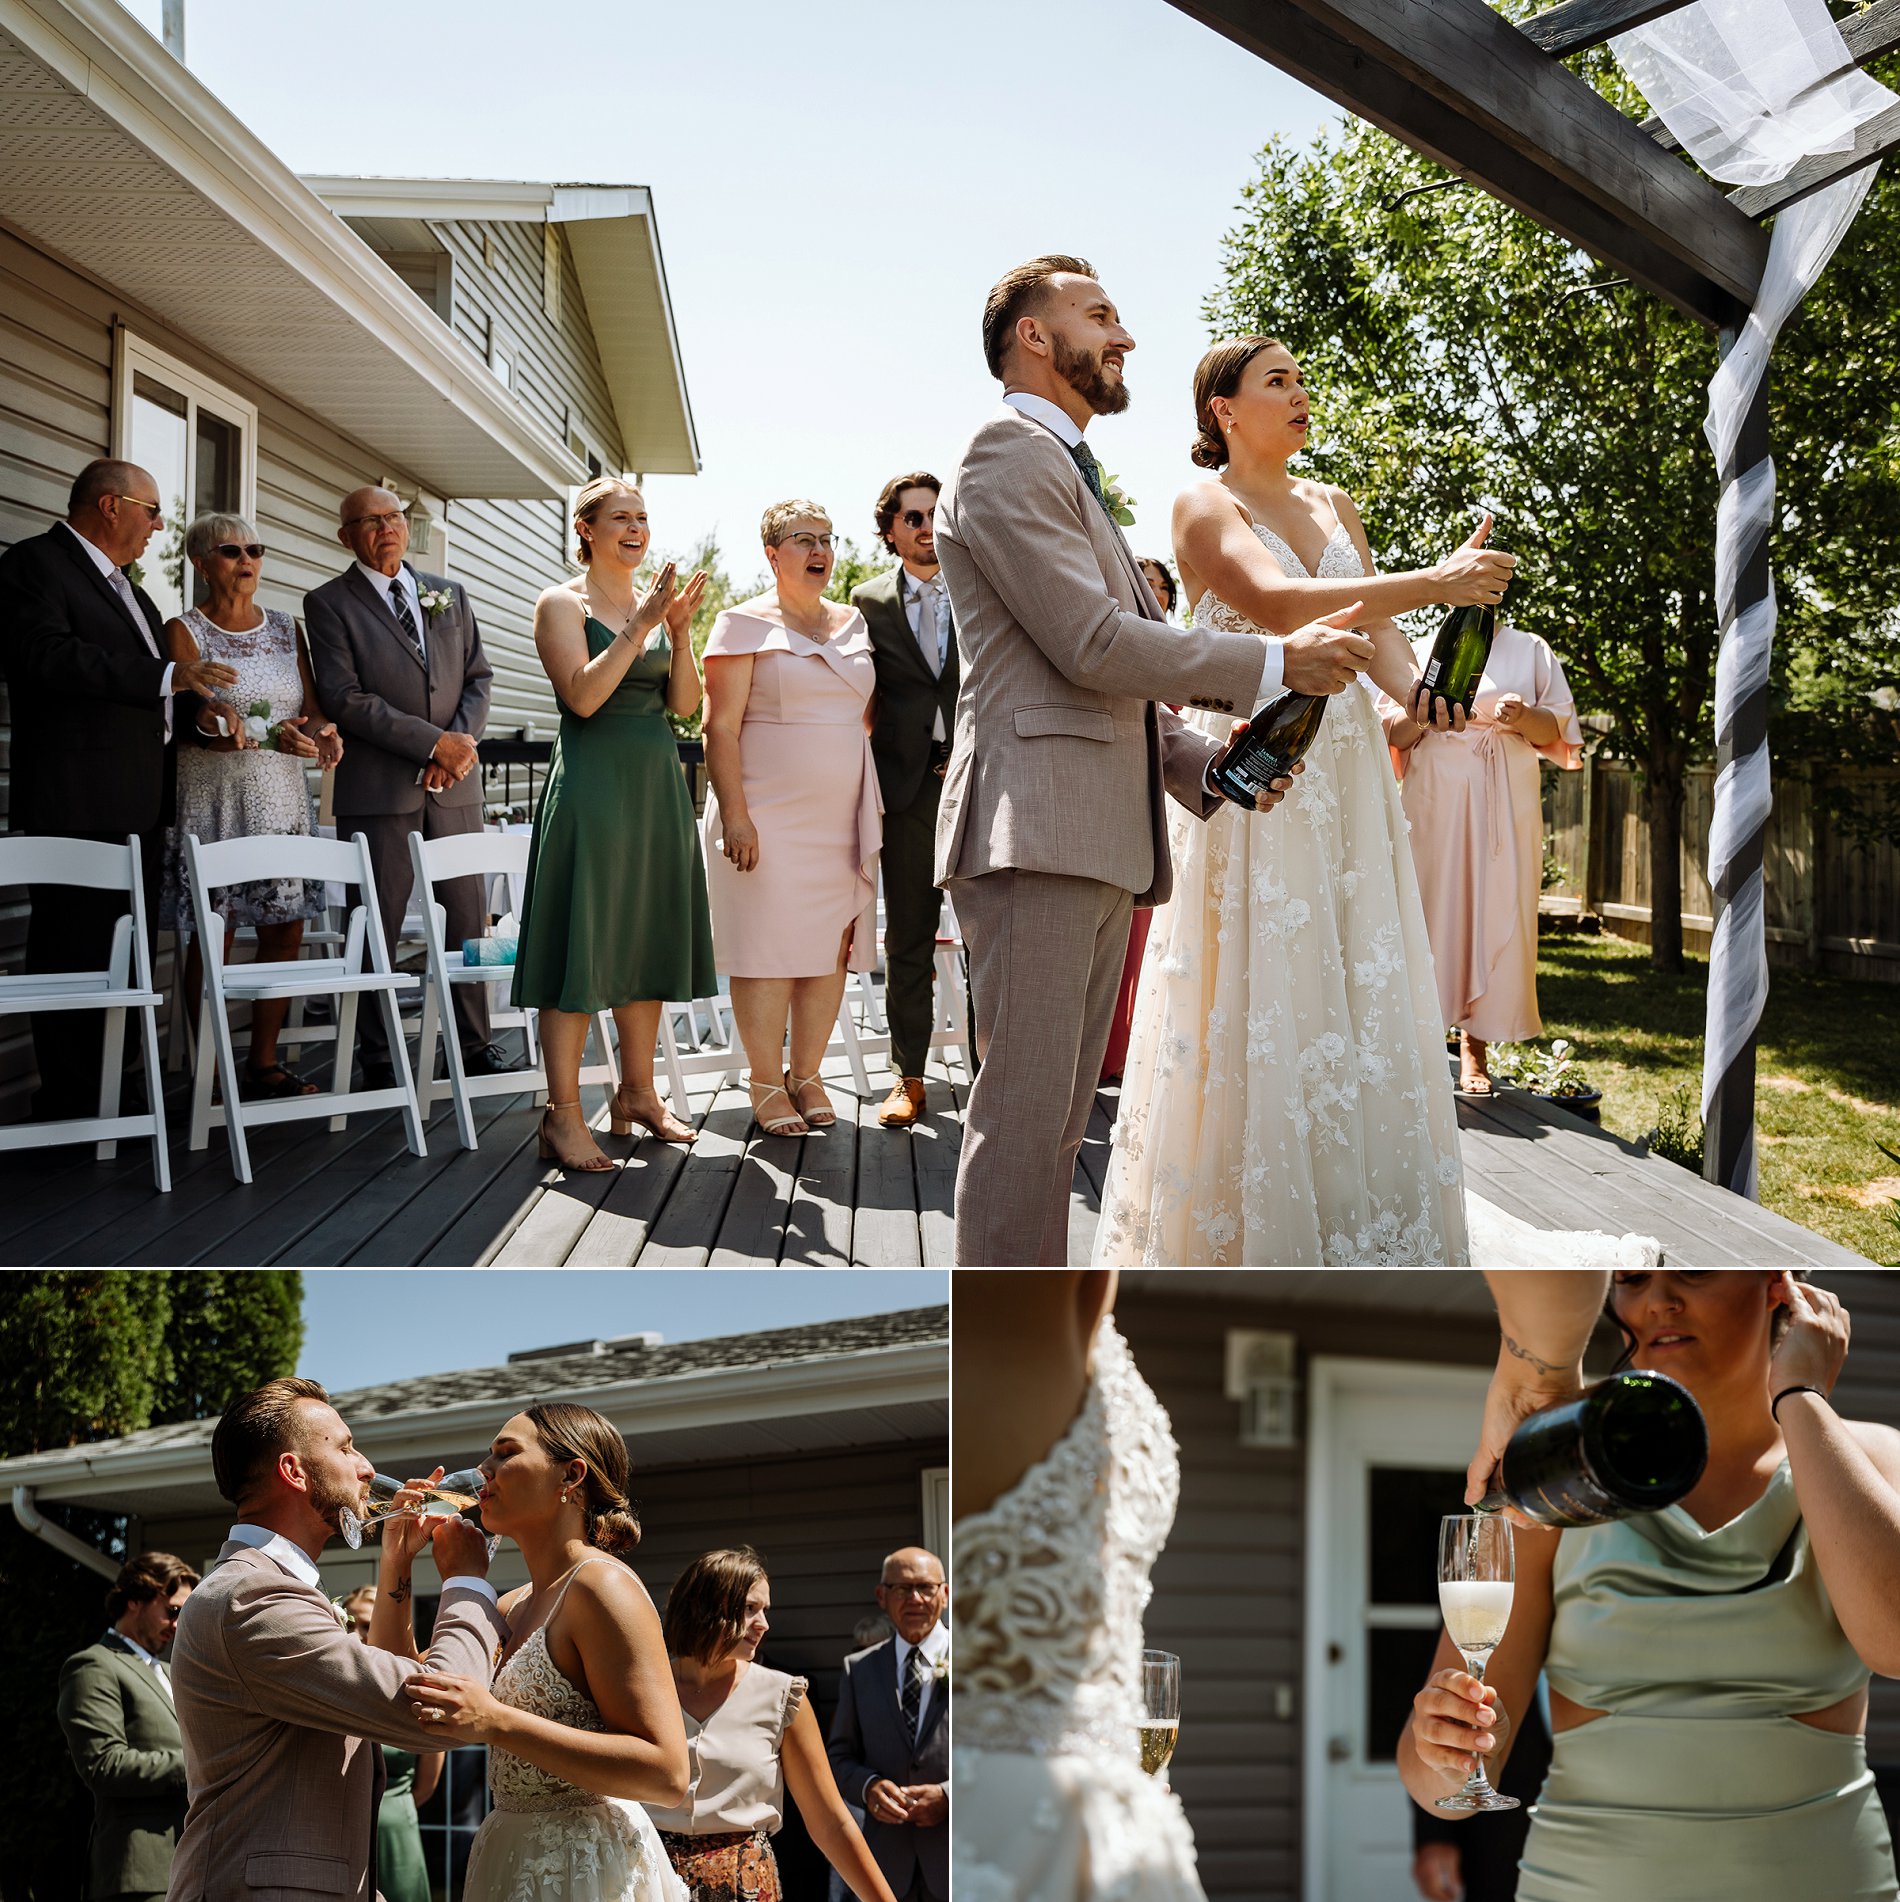 Bride and groom pop the cork on a bottle of champagne to celebrate their outdoor wedding.